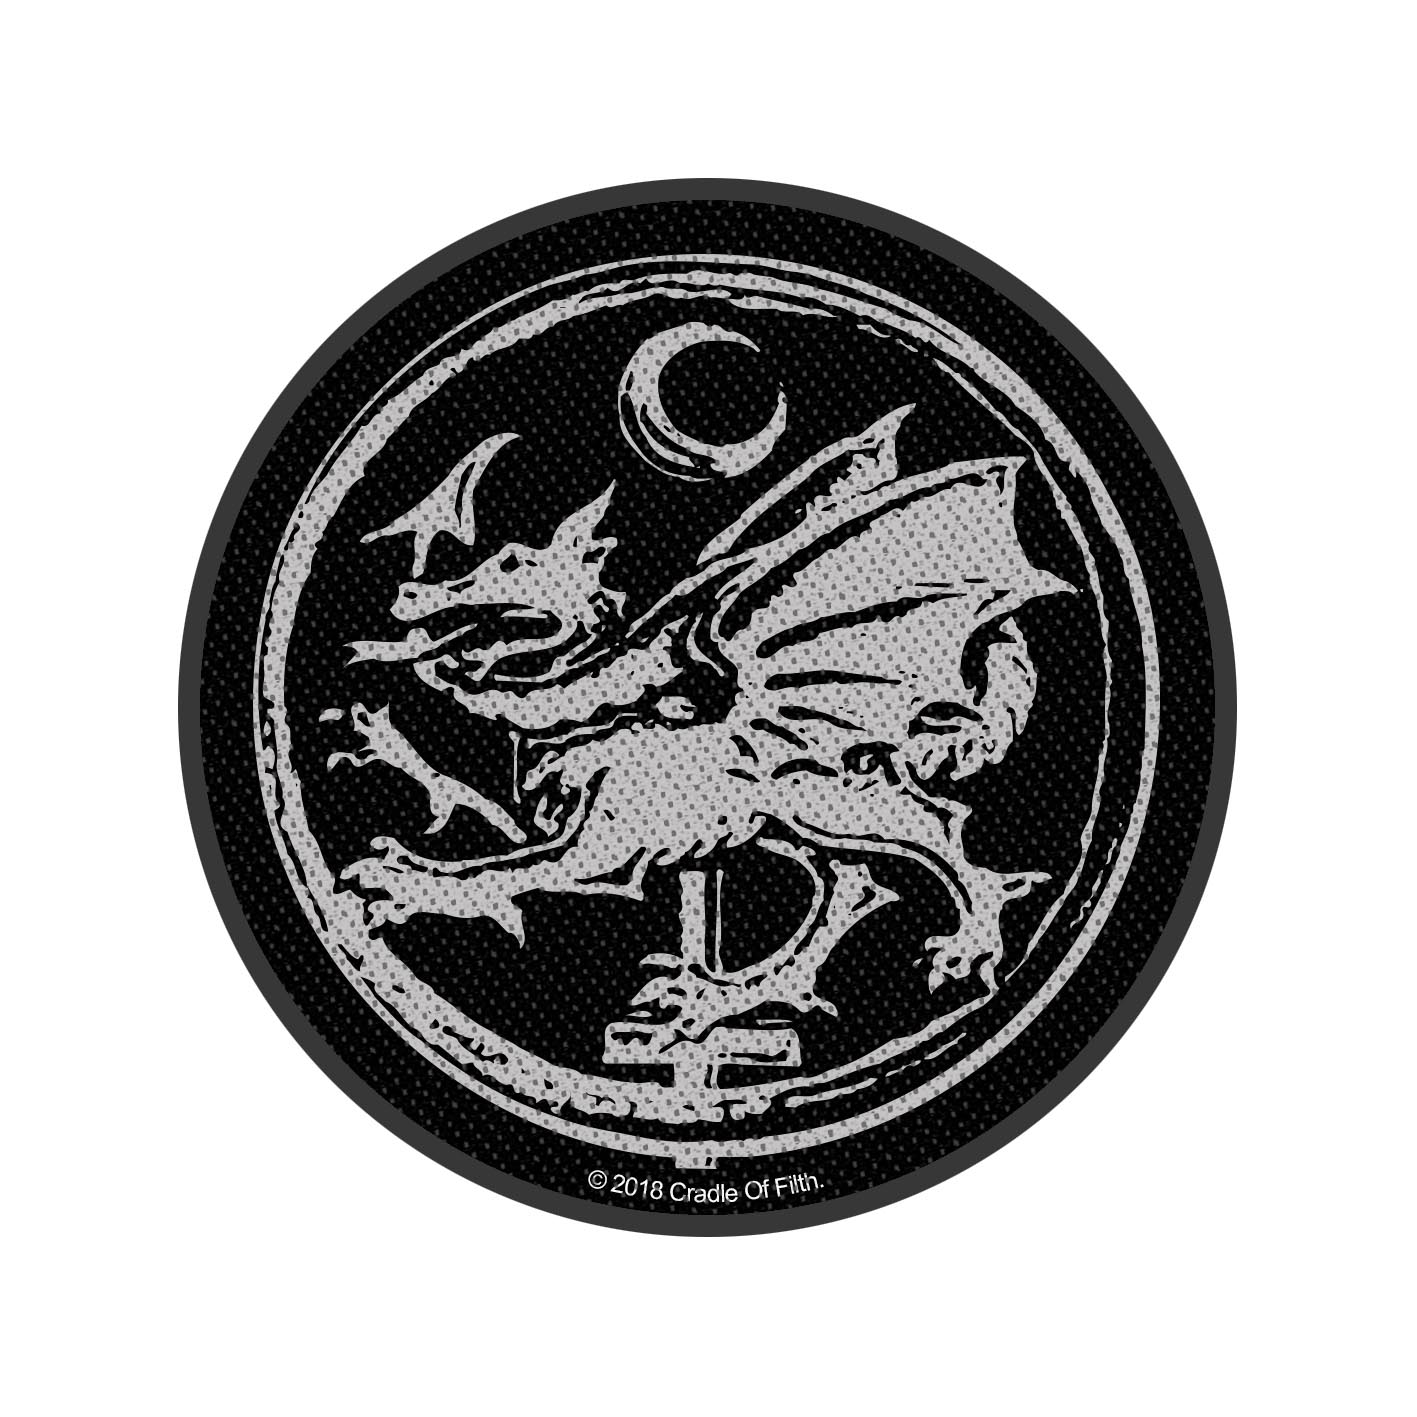 Cradle Of Filth 'Order Of The Dragon' Woven Patch - HMOL